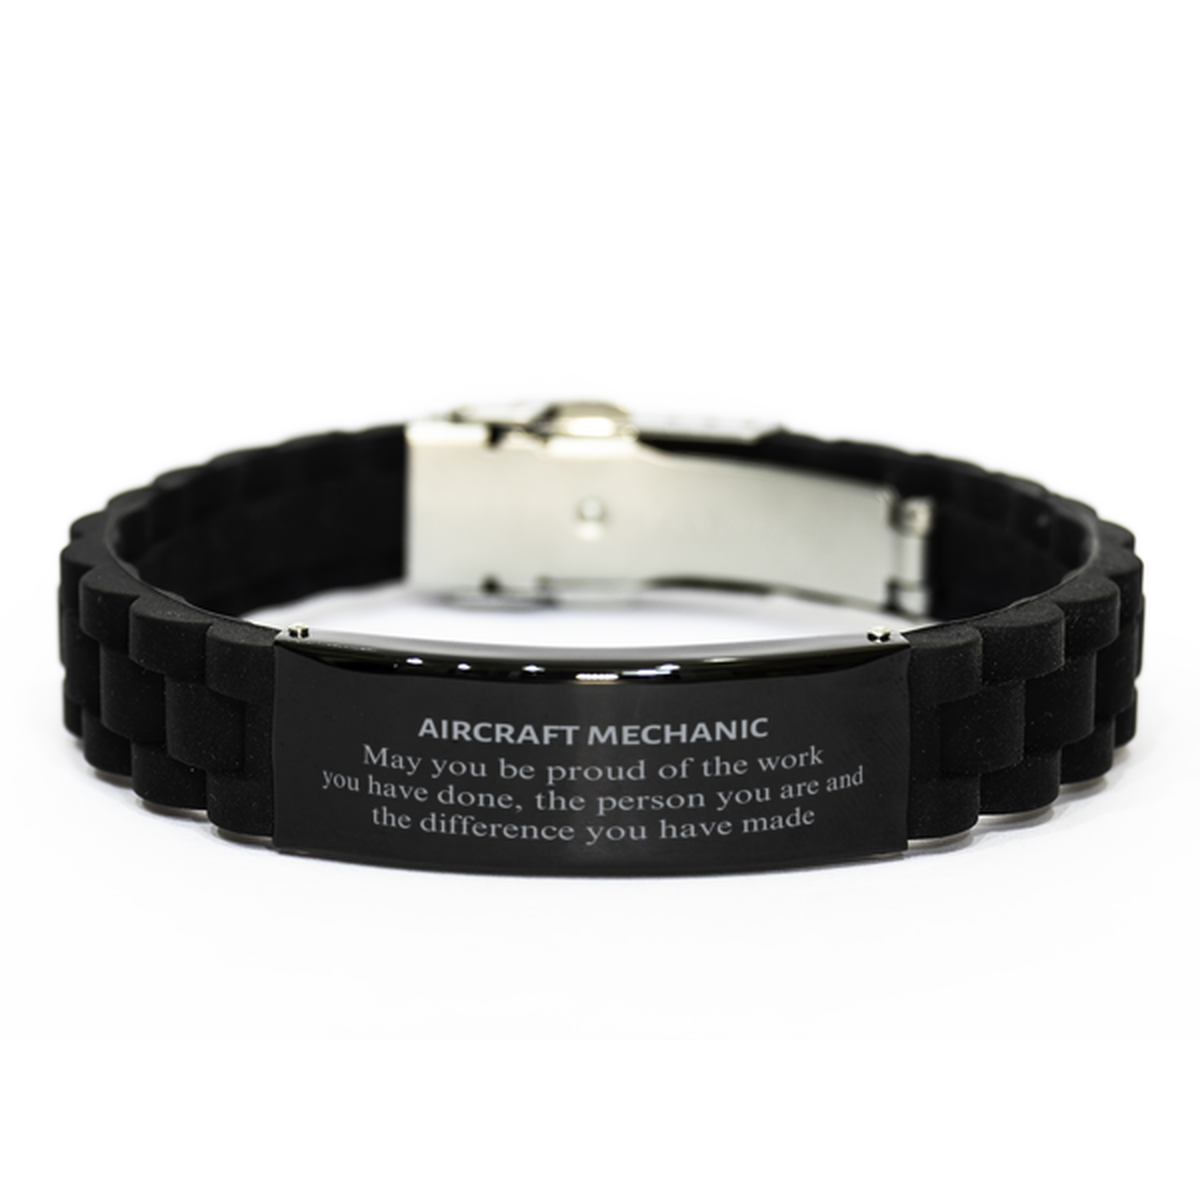 Aircraft Mechanic May you be proud of the work you have done, Retirement Aircraft Mechanic Black Glidelock Clasp Bracelet for Colleague Appreciation Gifts Amazing for Aircraft Mechanic